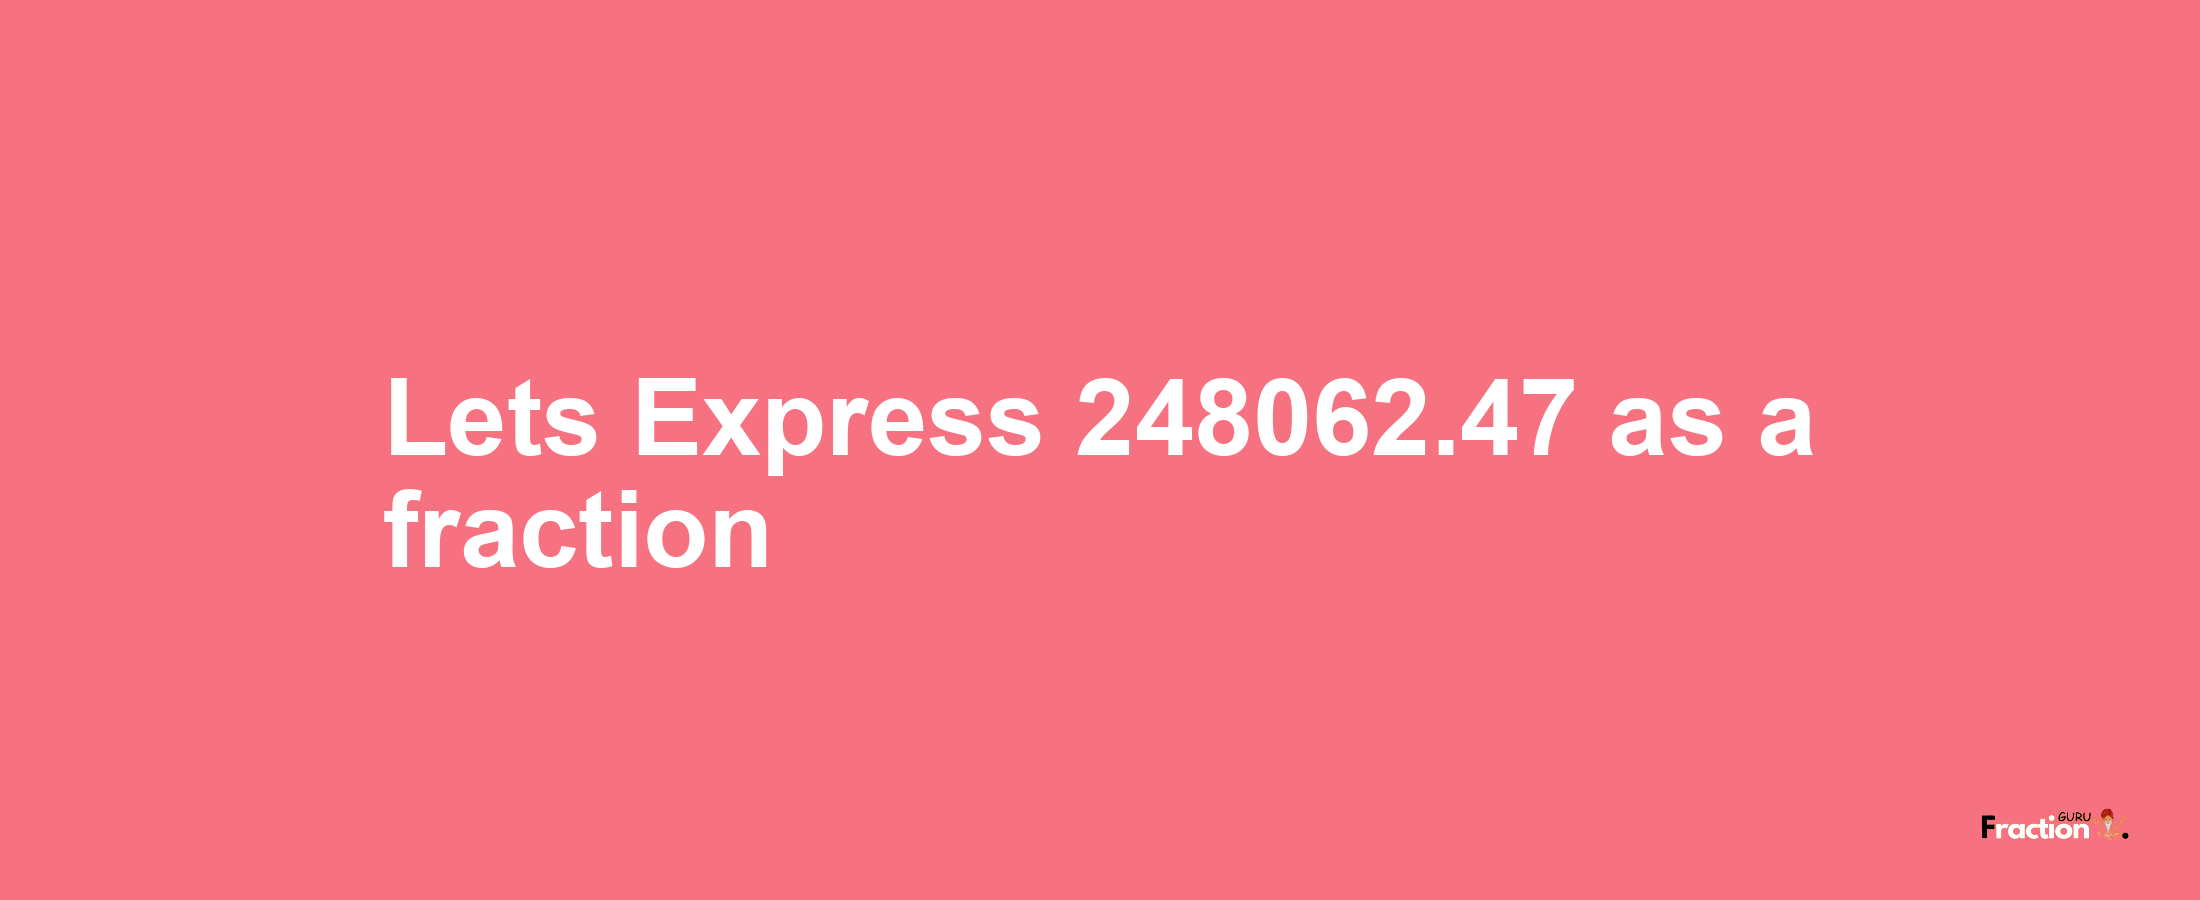 Lets Express 248062.47 as afraction